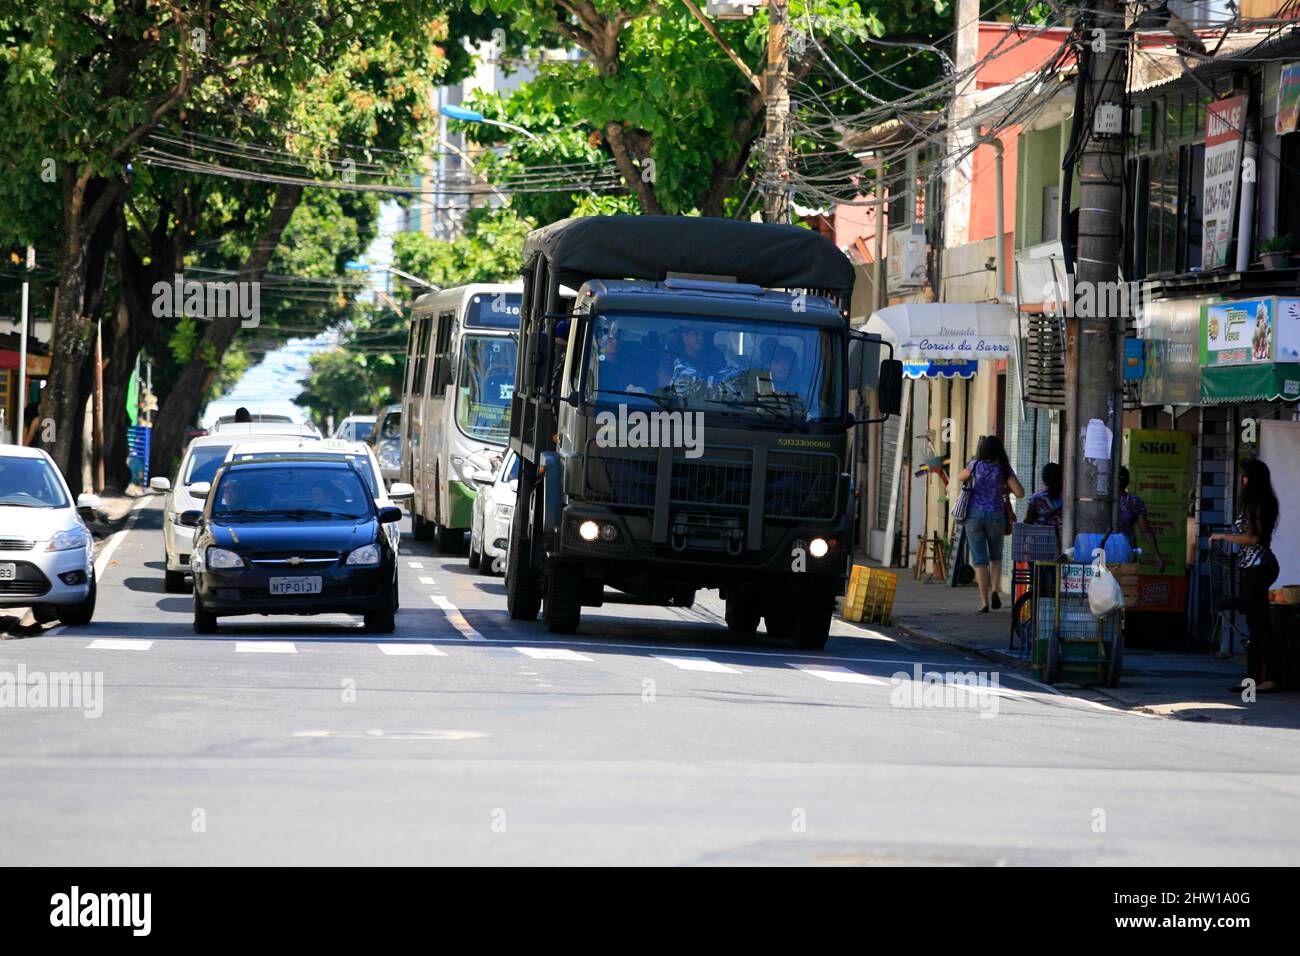 salvador, bahia, brazil - april 23, 2014: Military members of the Army patrol in the neighborhood of Sussuarana in Salvador, during a military police Stock Photo